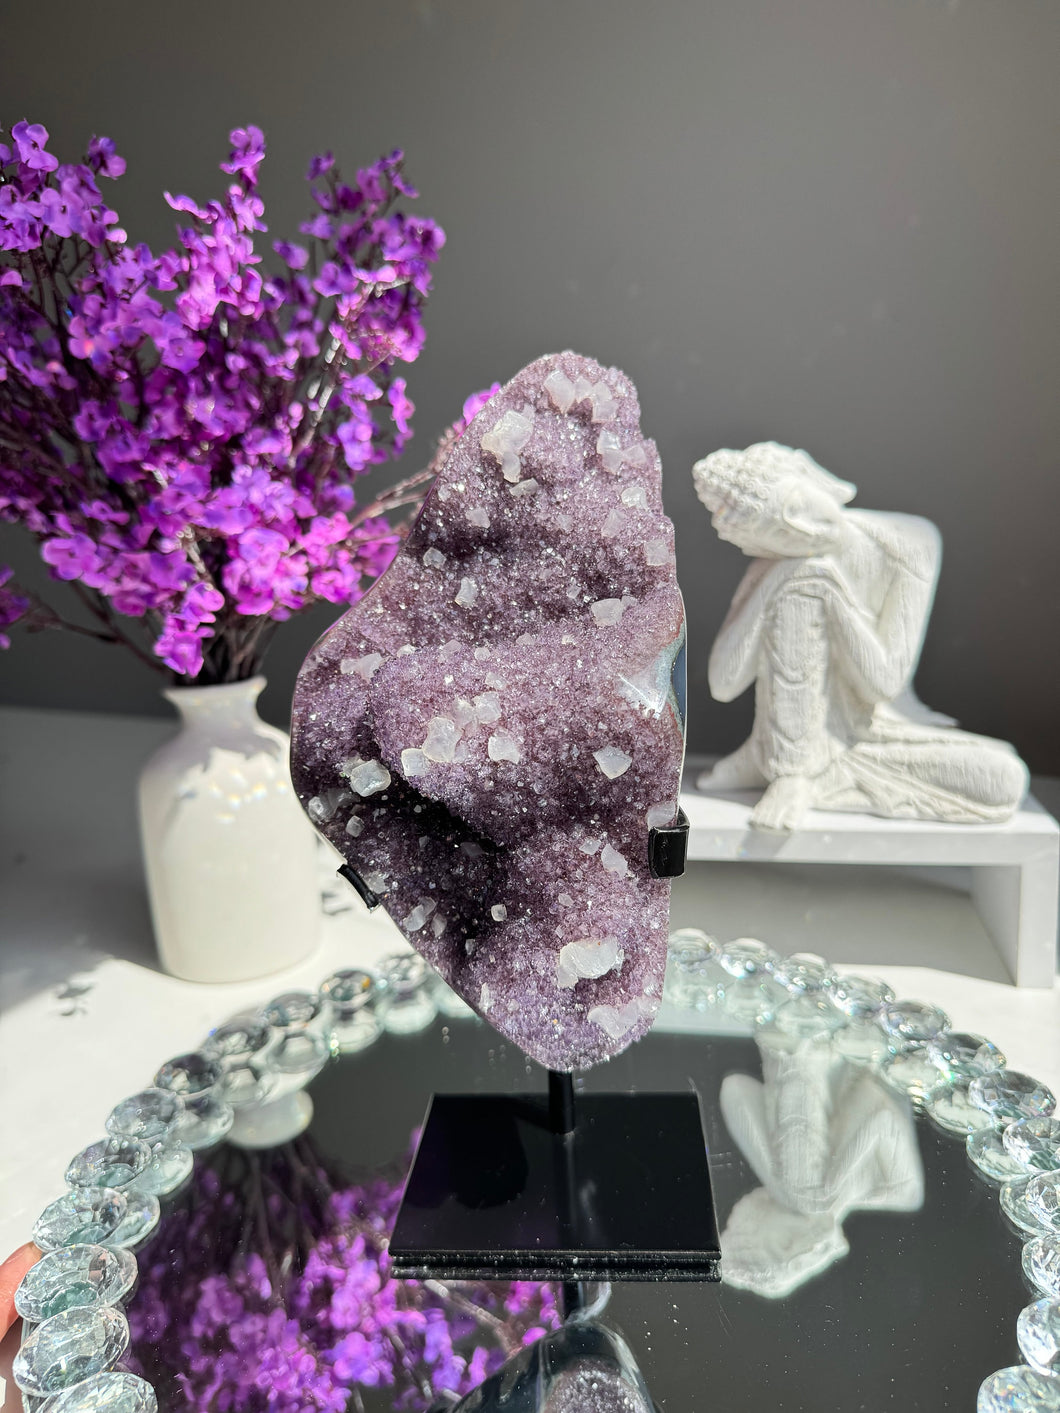 Amethyst with calcite Healing crystals 2761